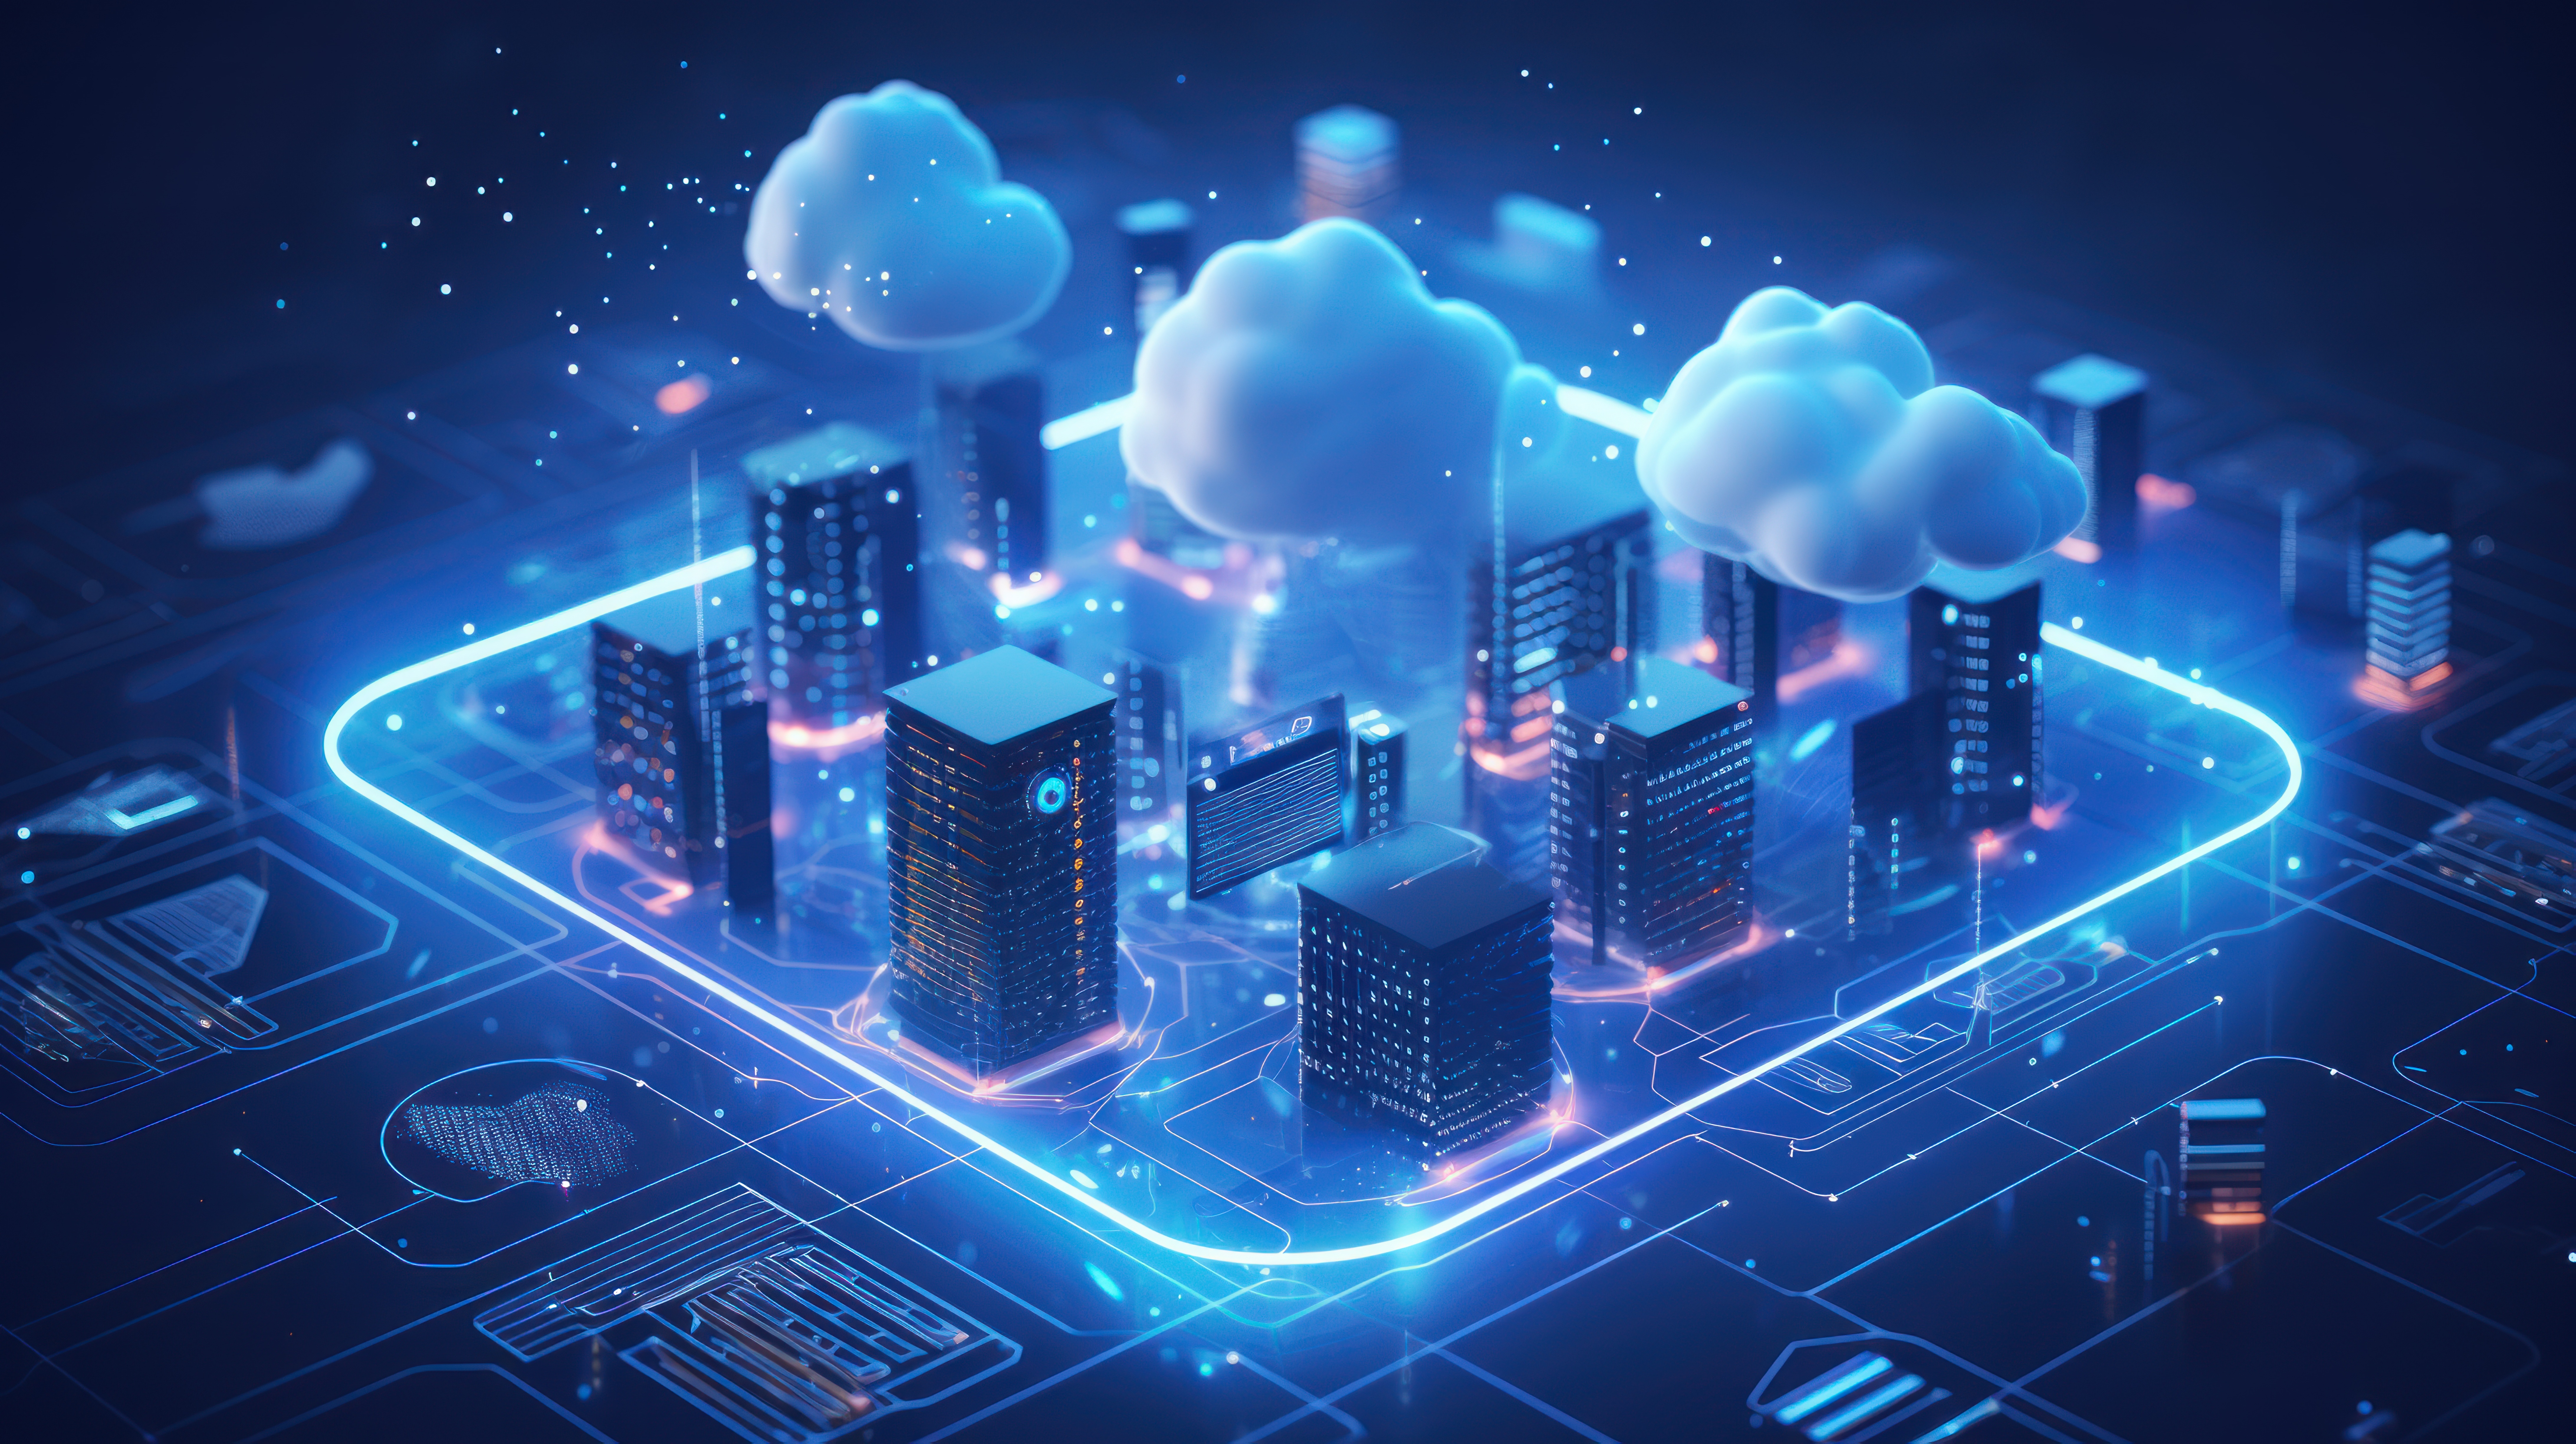 Analyze the role of cloud computing in transforming modern IT operations